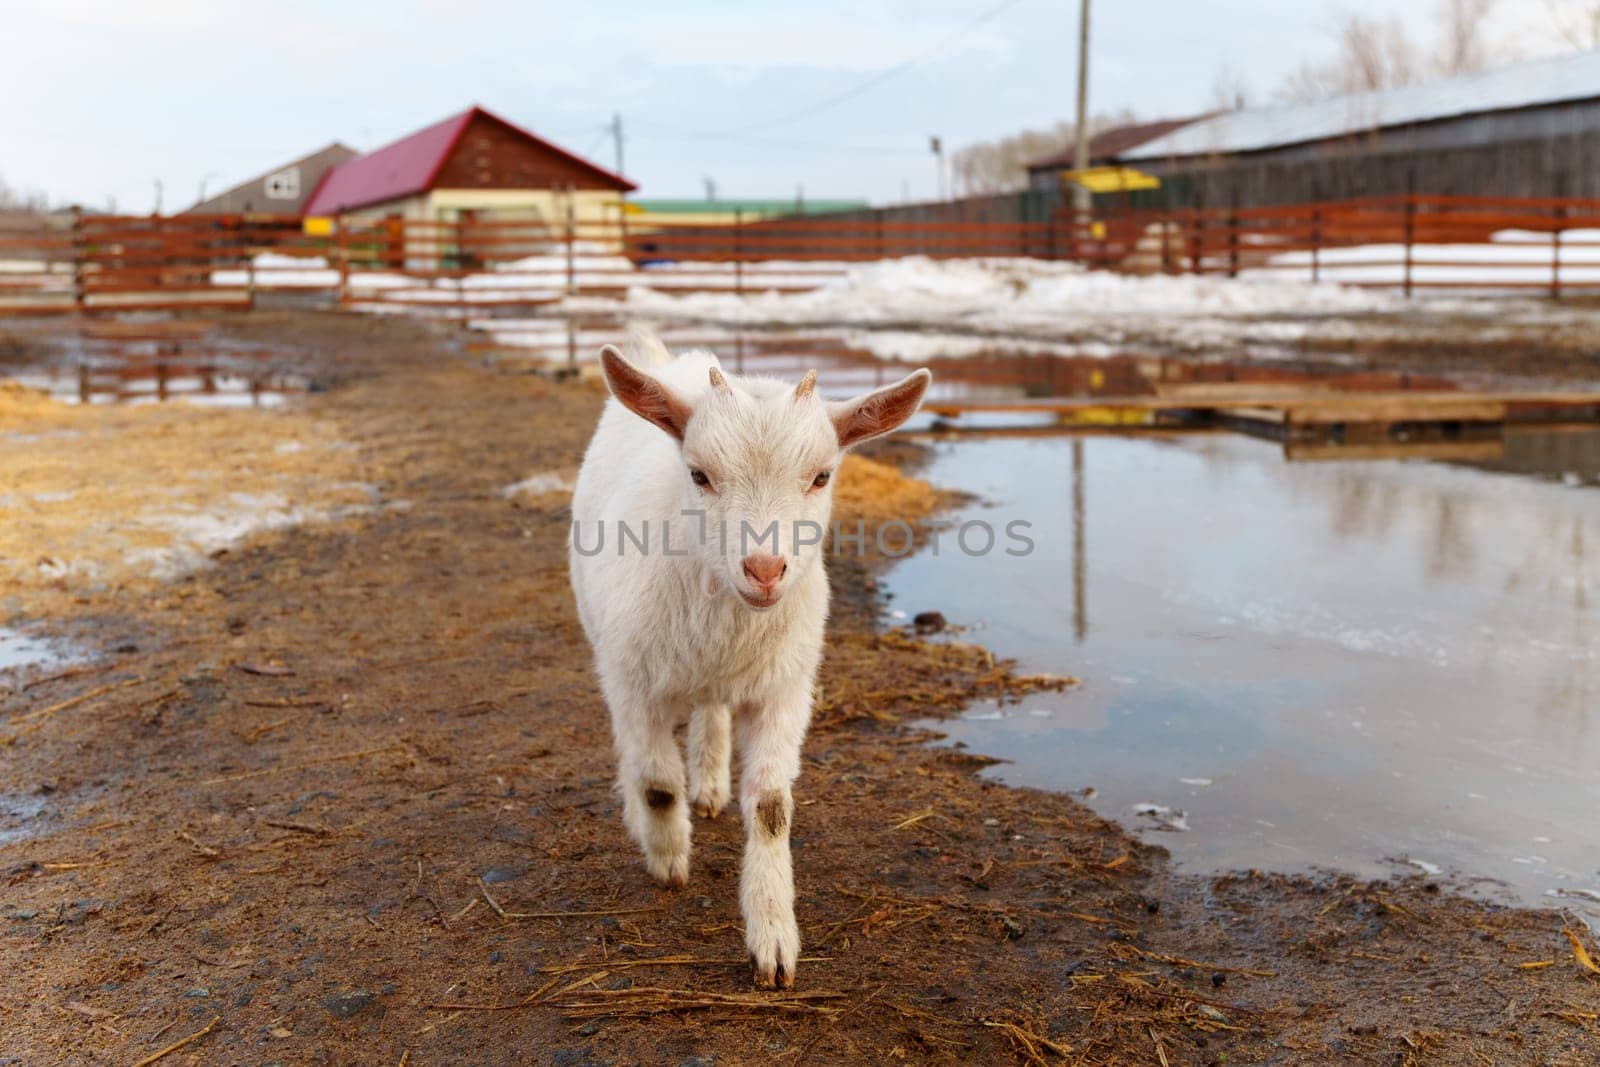 Young baby goat is seen standing next to a mature adult goat in a farm. by darksoul72